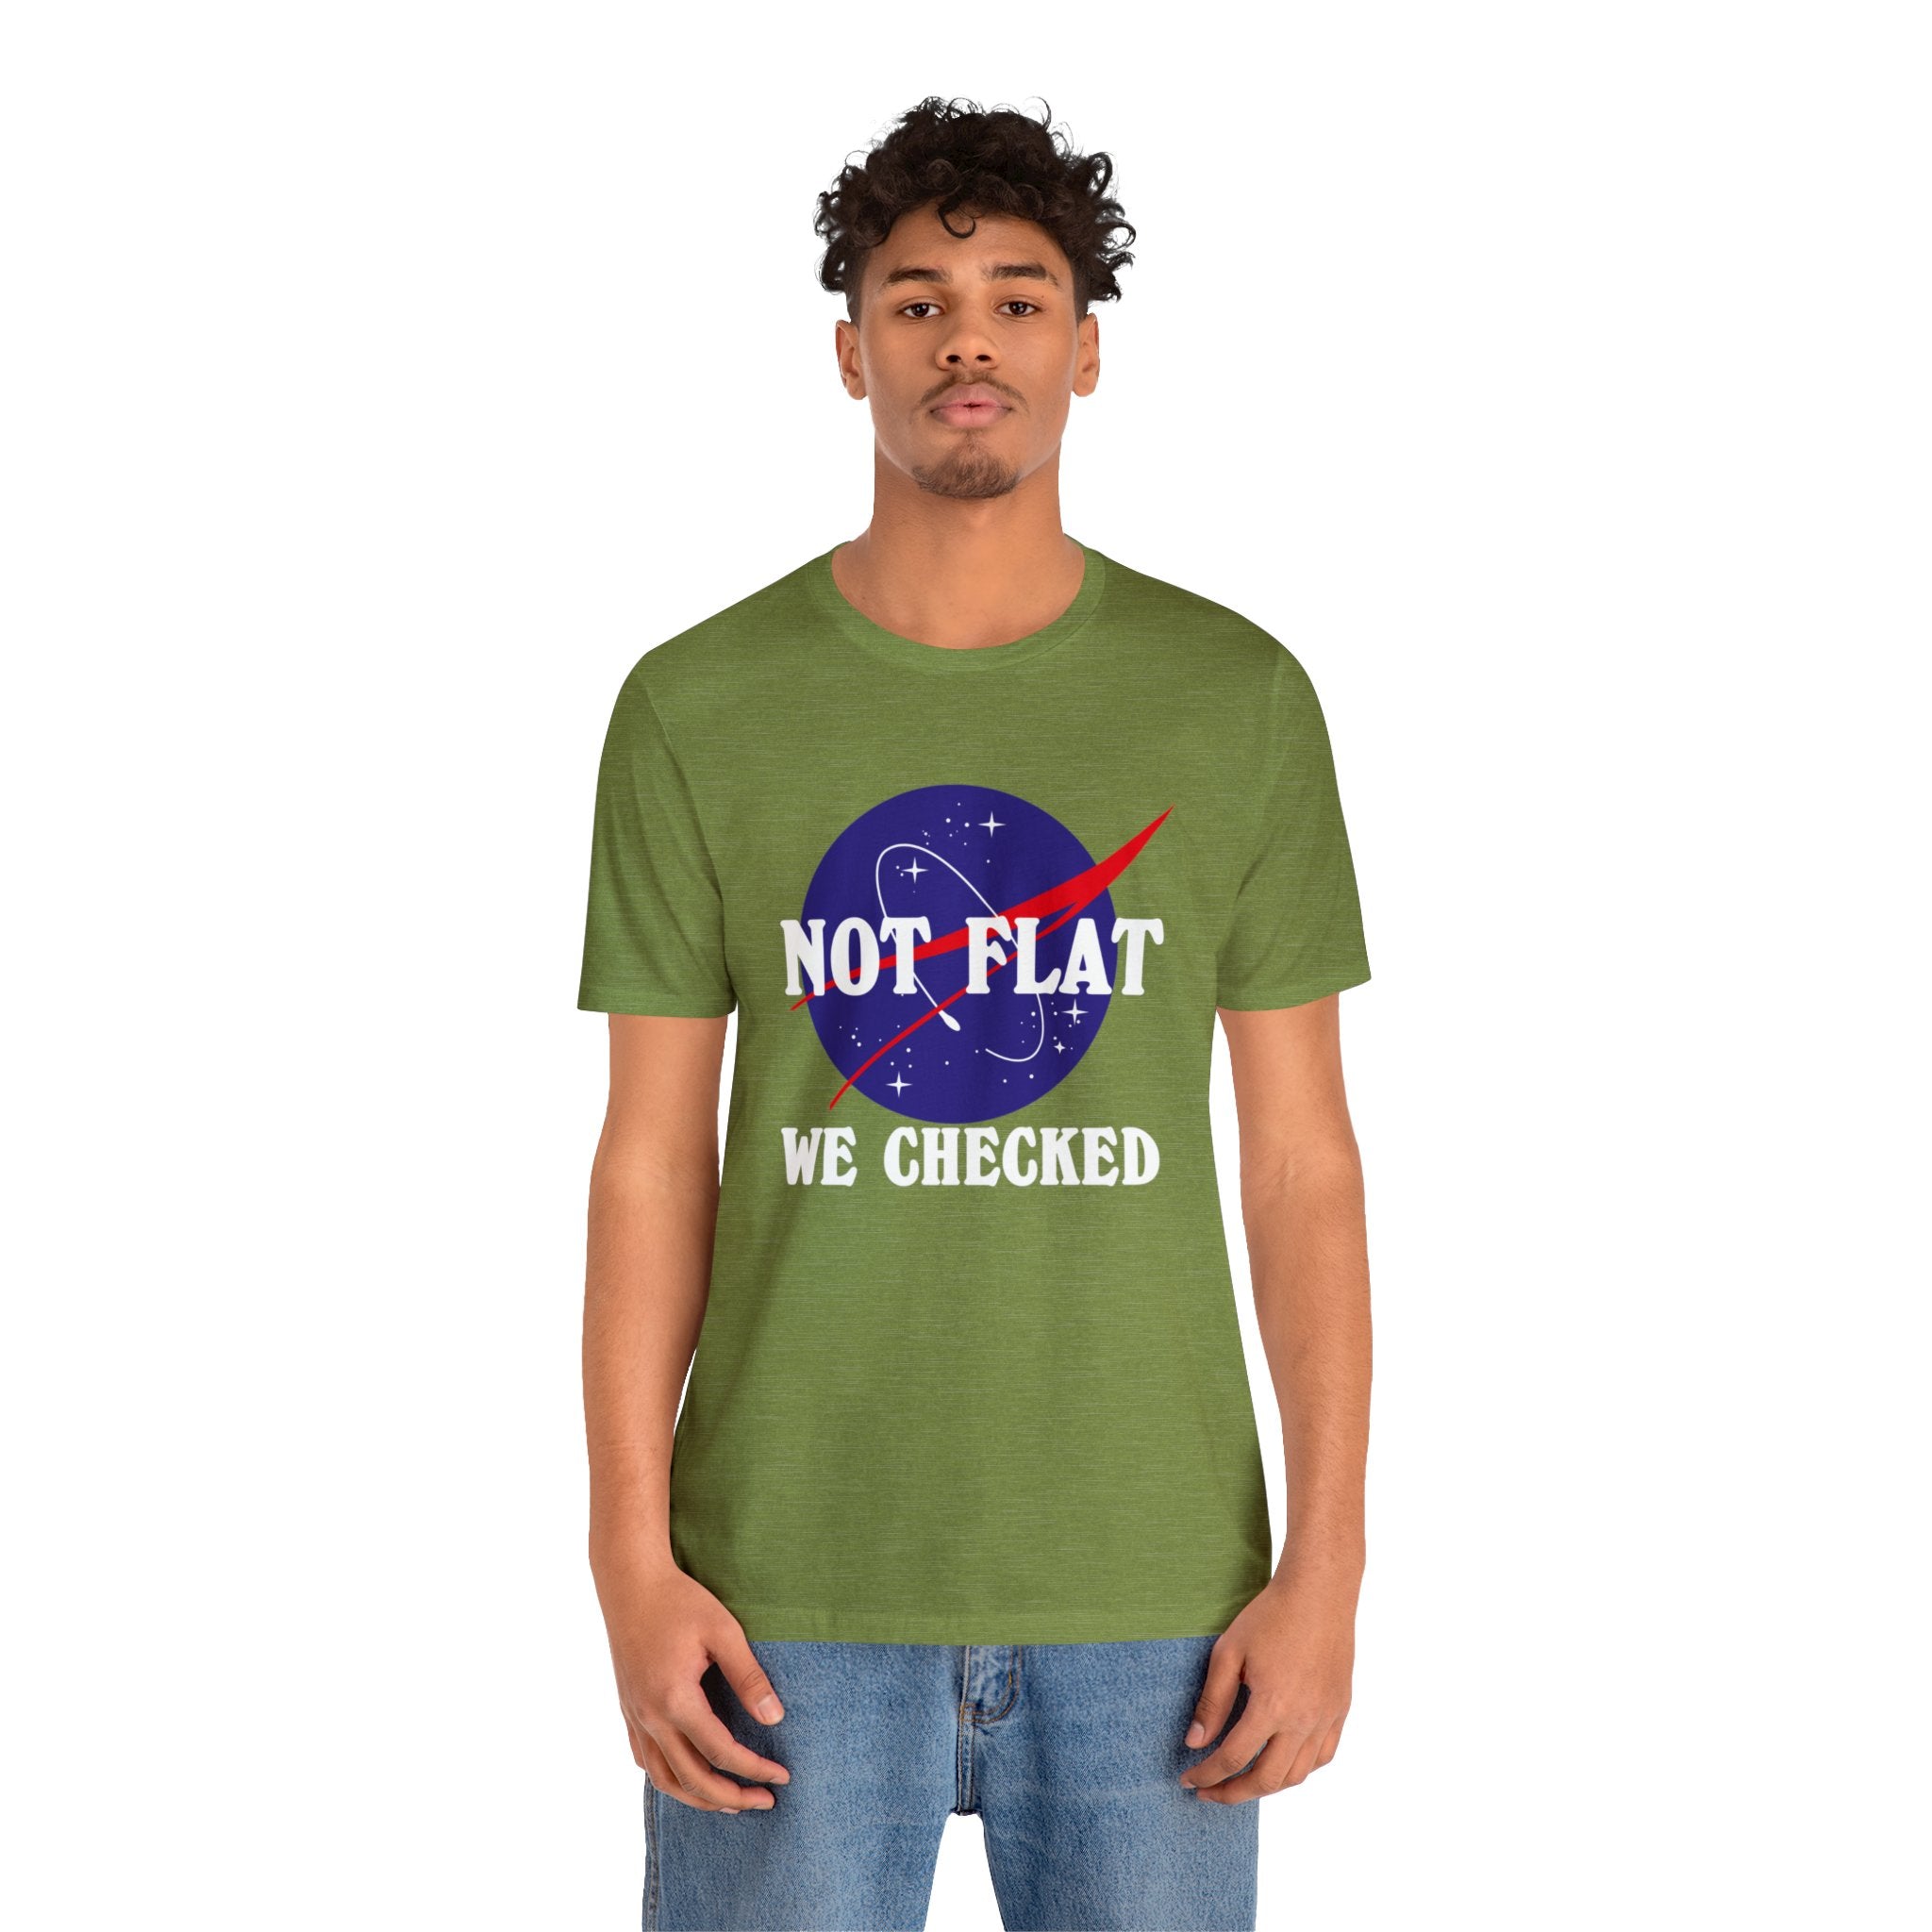 A man wearing a green "Earth Not Flat" t-shirt, showcasing his humor and scientific knowledge regarding the Earth's shape.